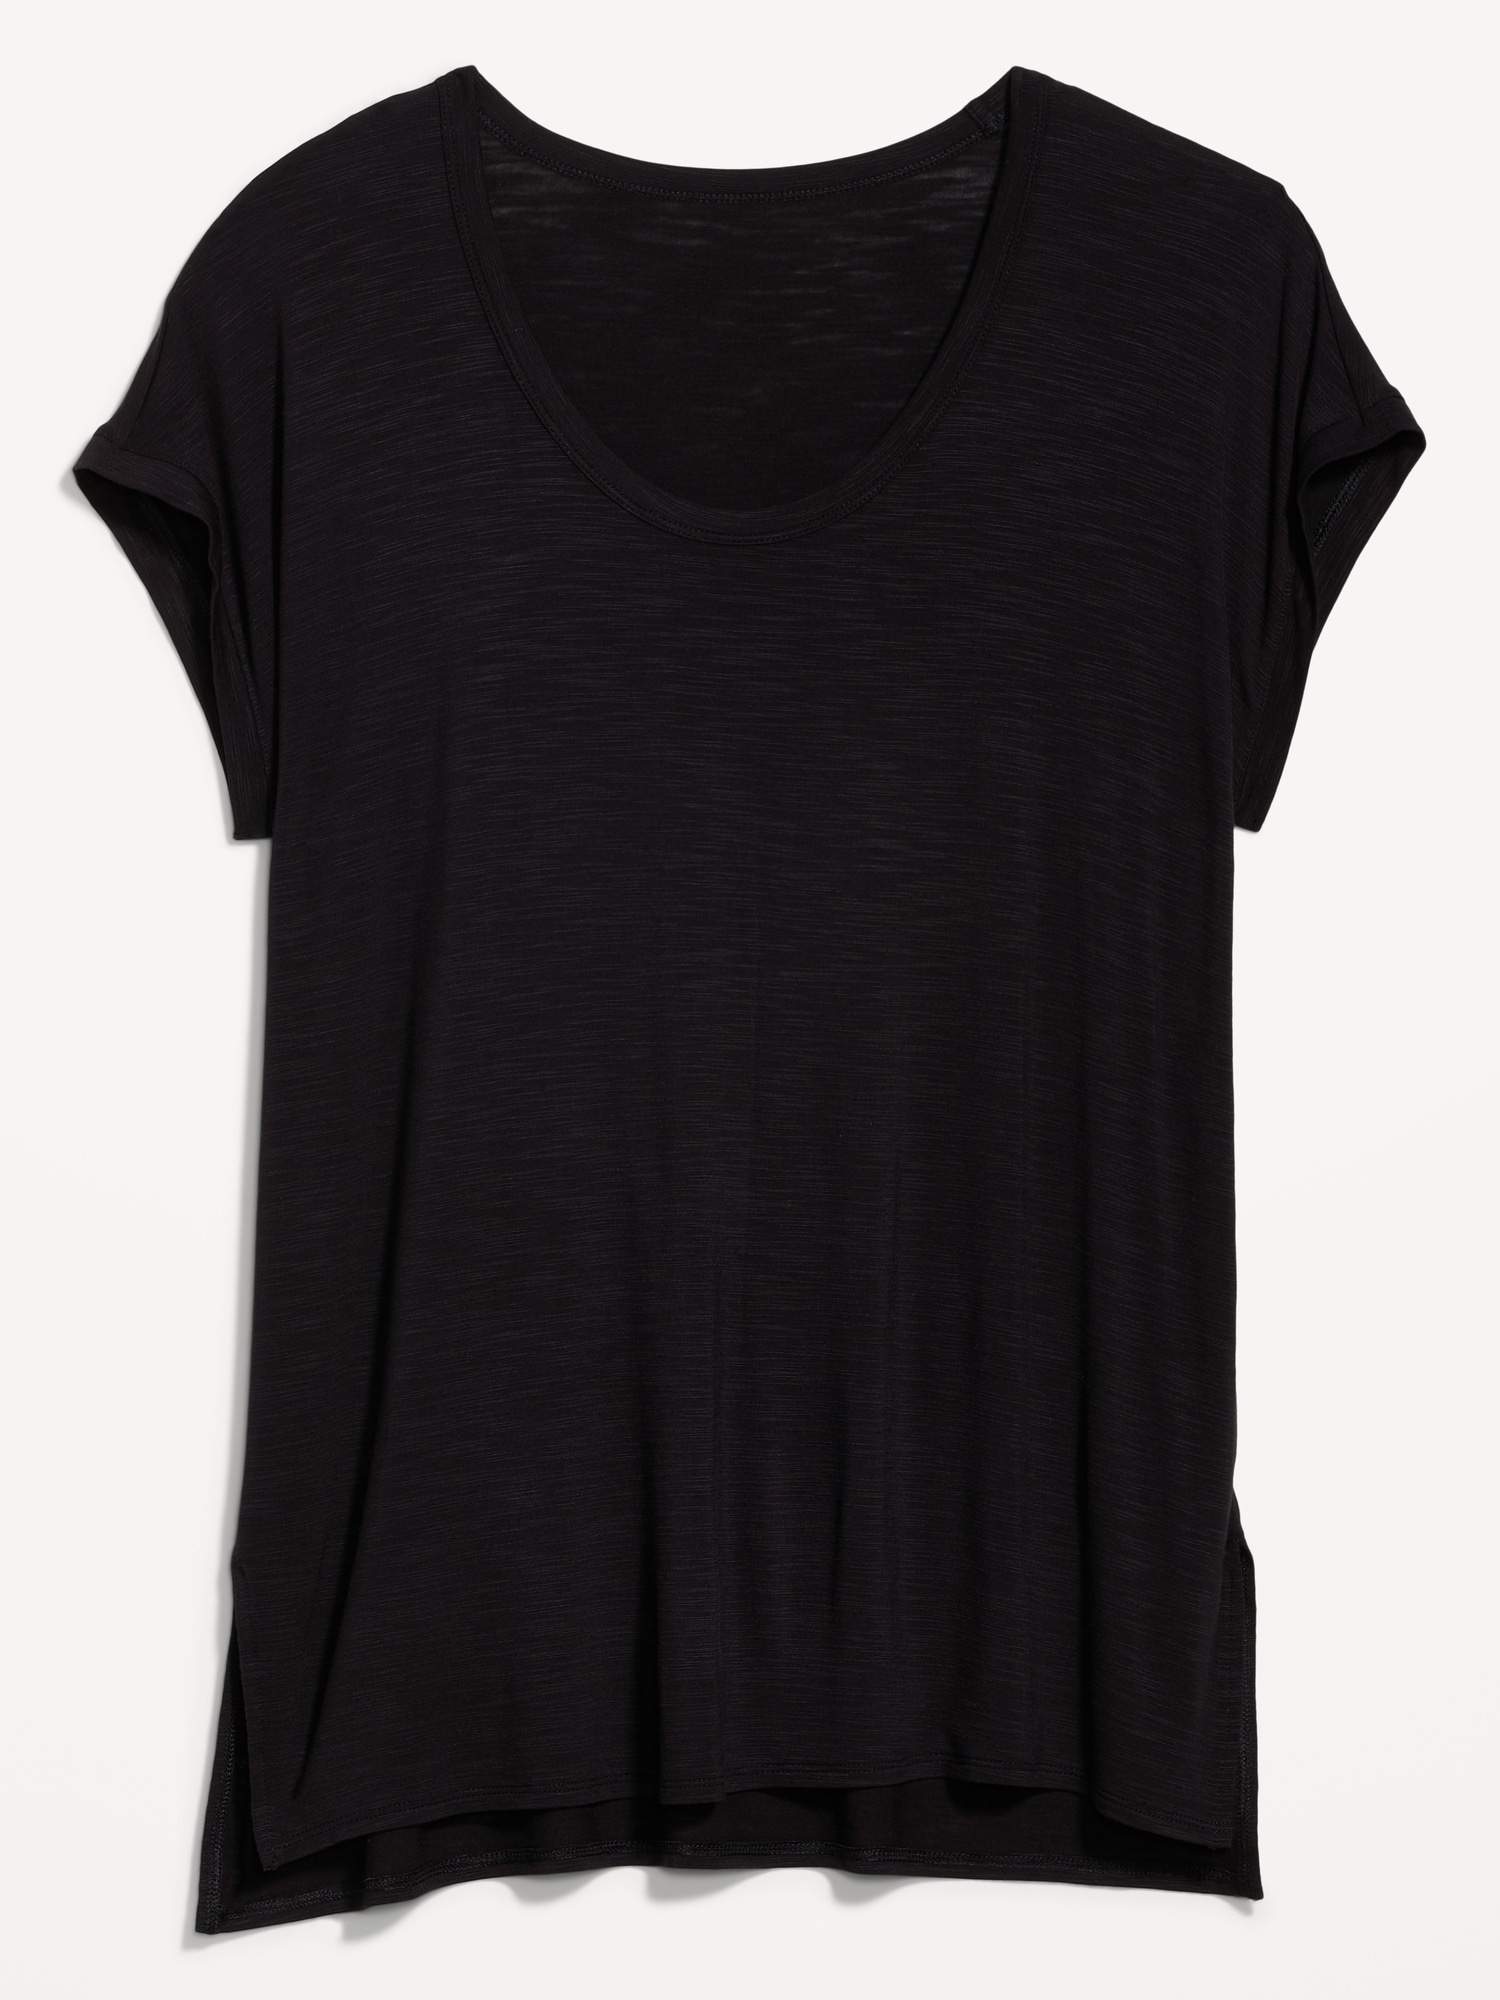 Luxe Tunic T-Shirt | Old Navy